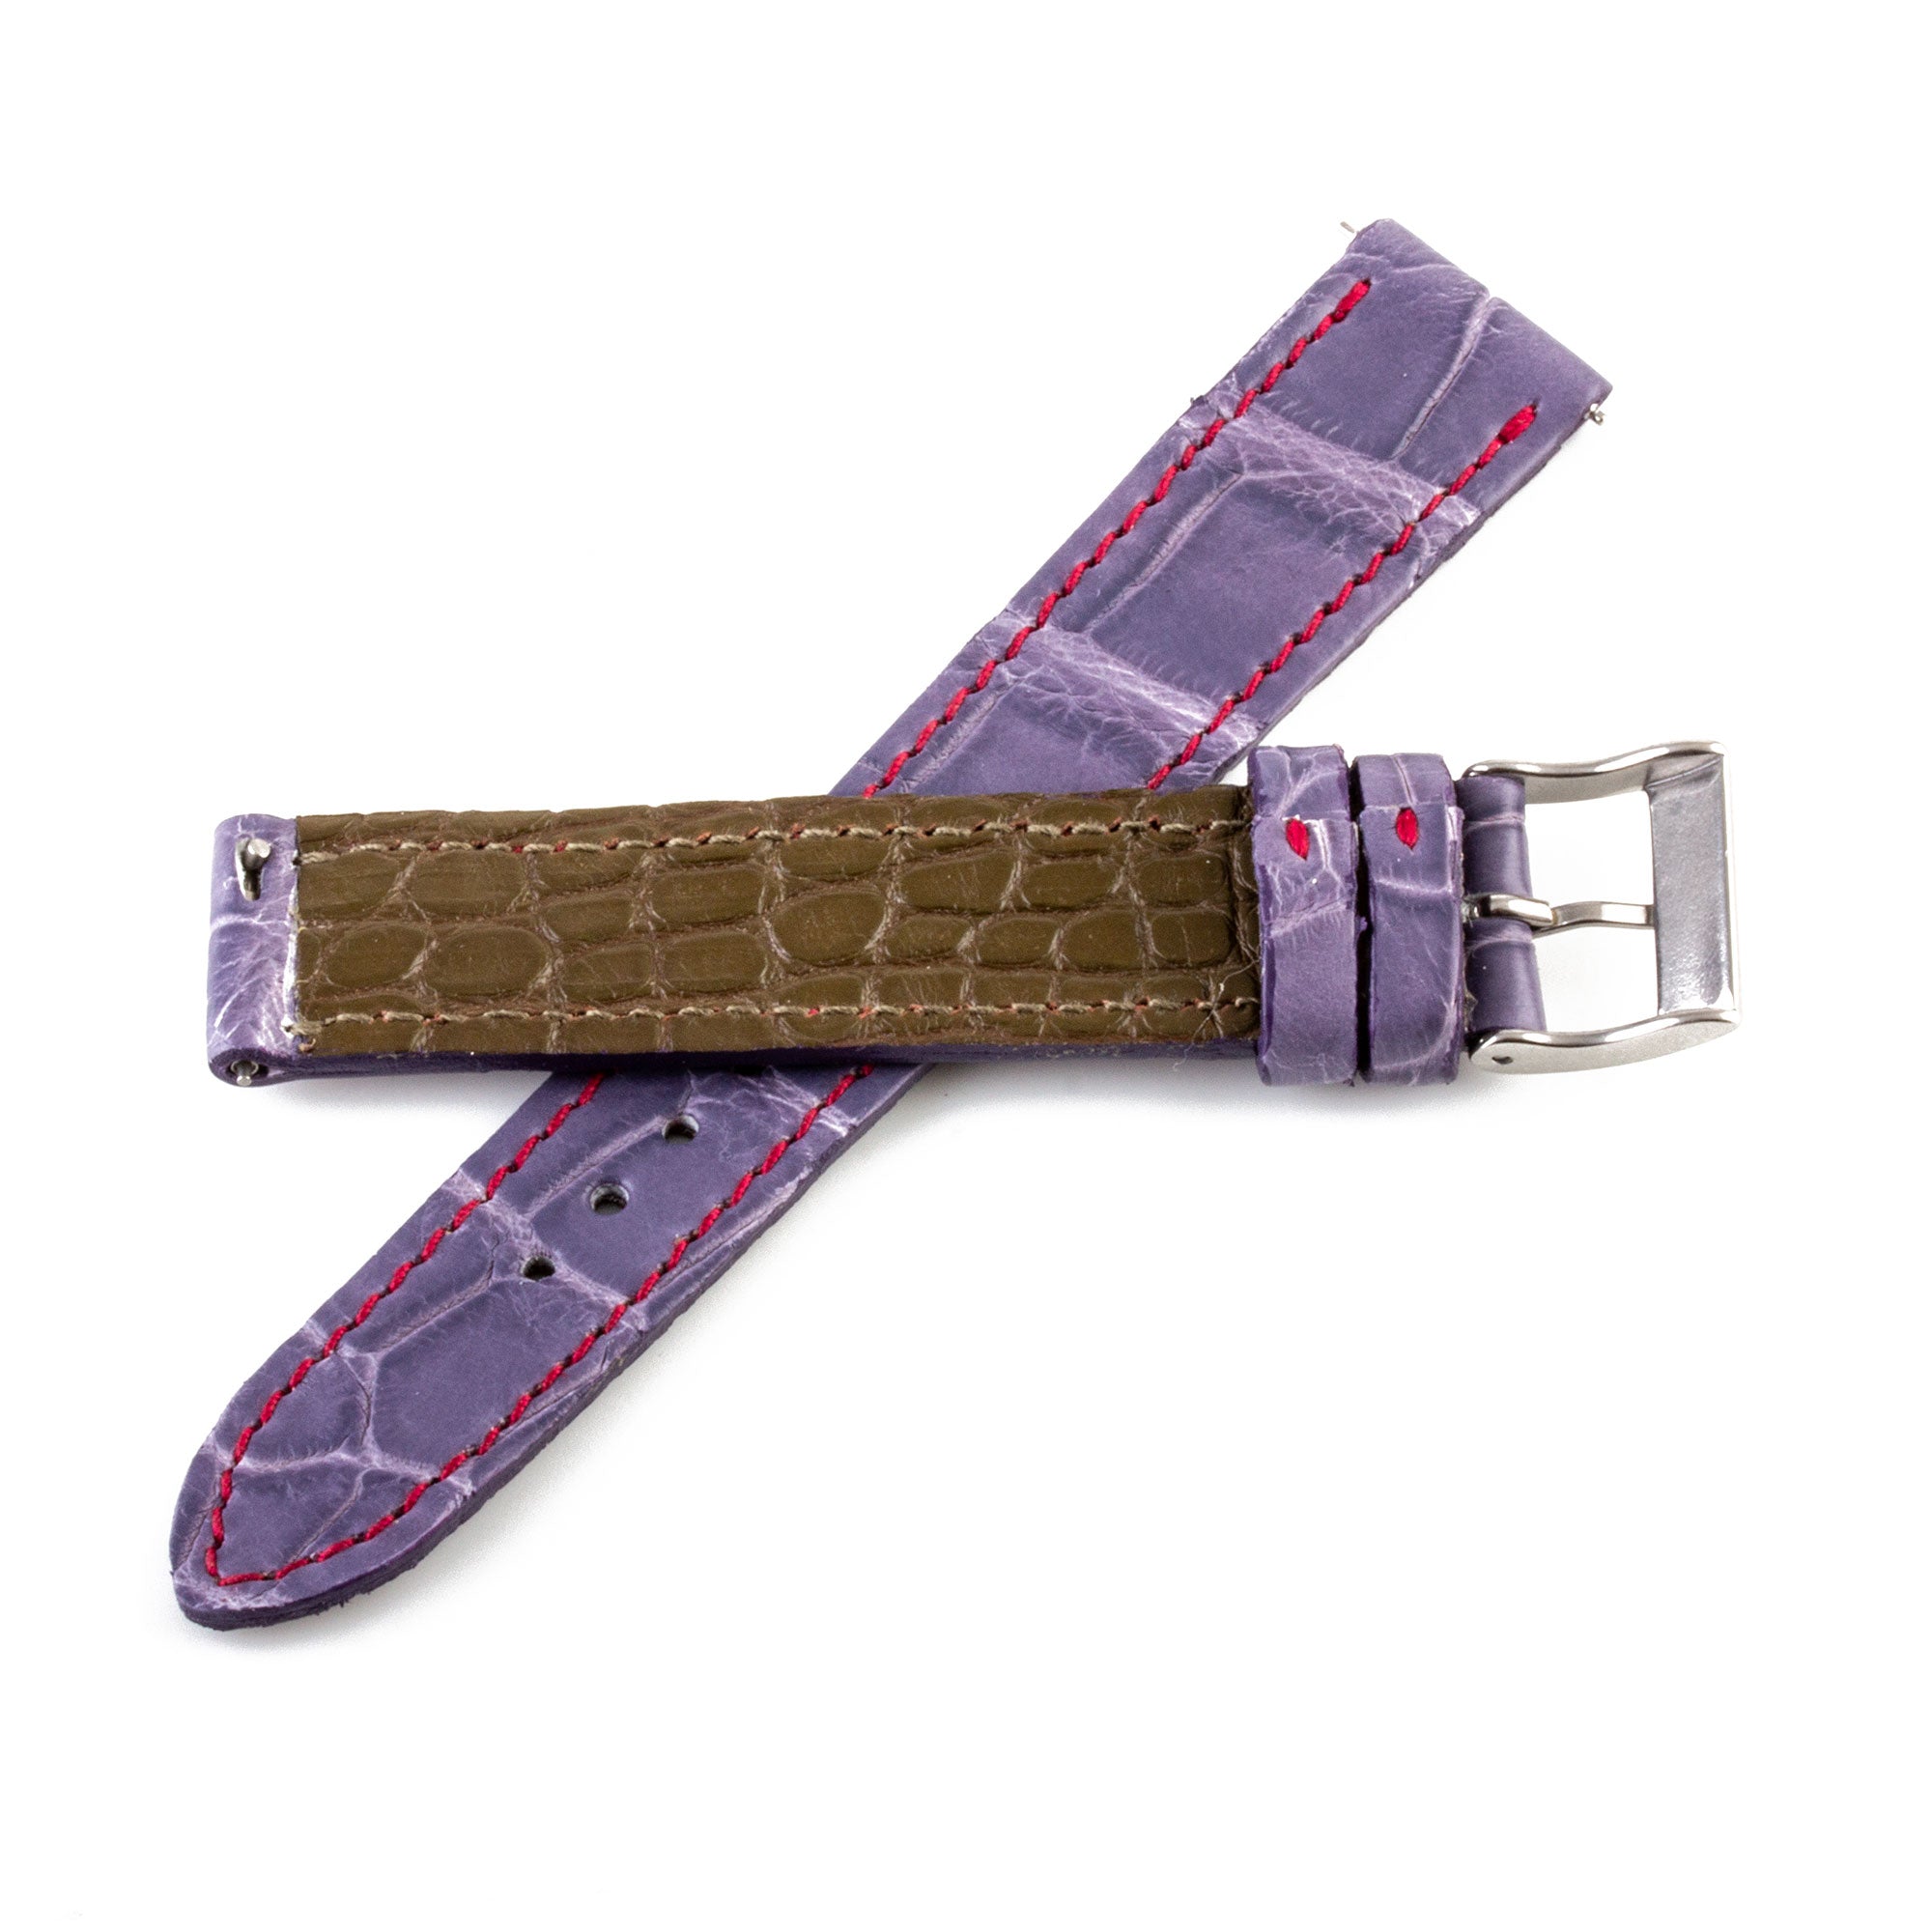 Alligator "Solo" leather watch band - 17mm width (0.67 inches) / Size M (n° 5)